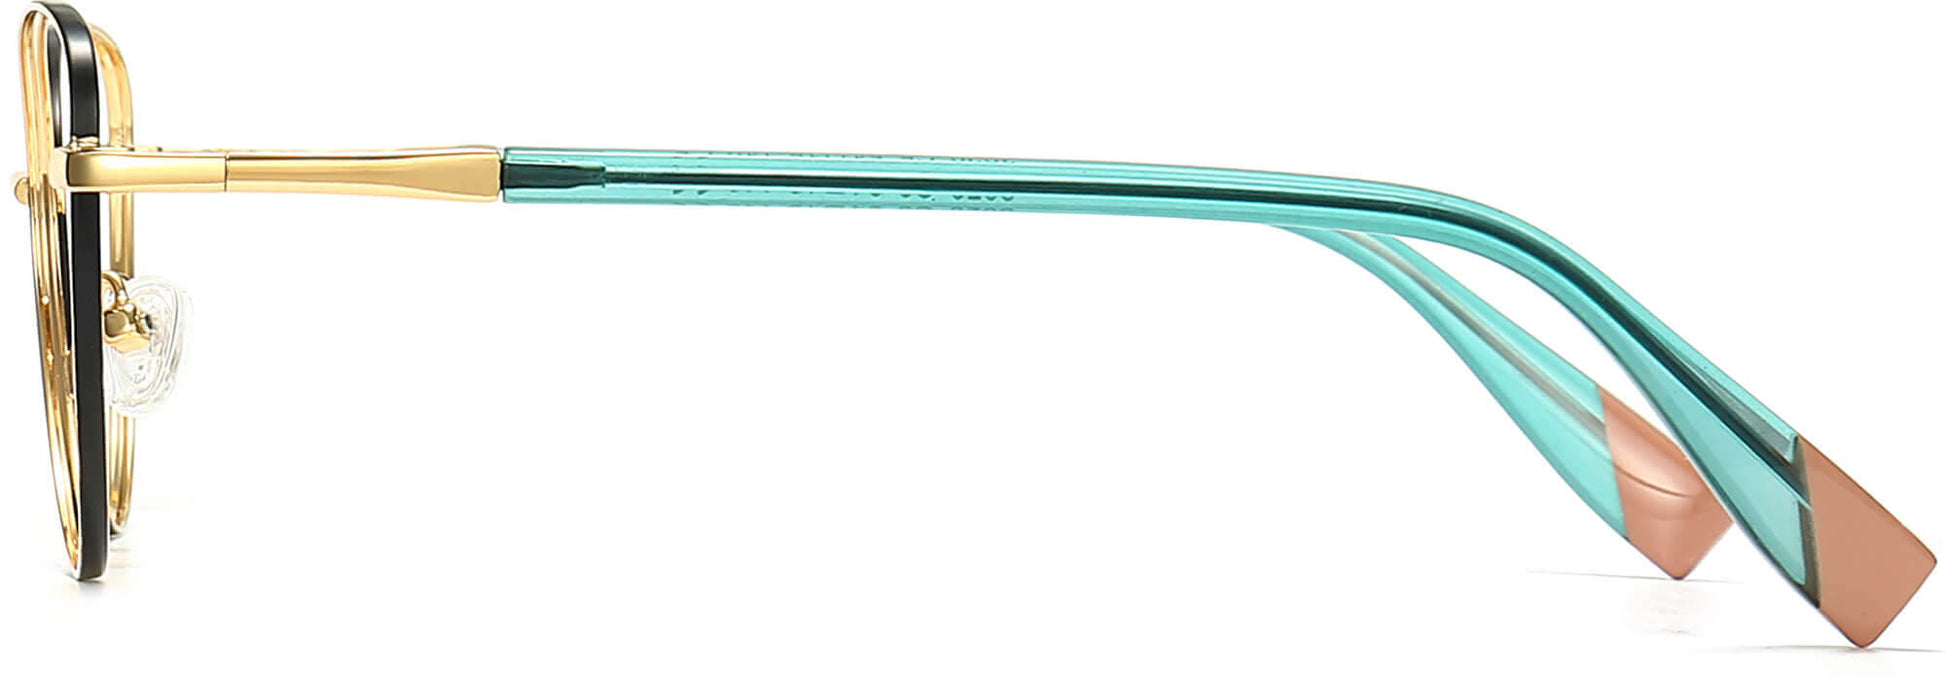 Imani Cateye Gold Eyeglasses from ANRRI, side view